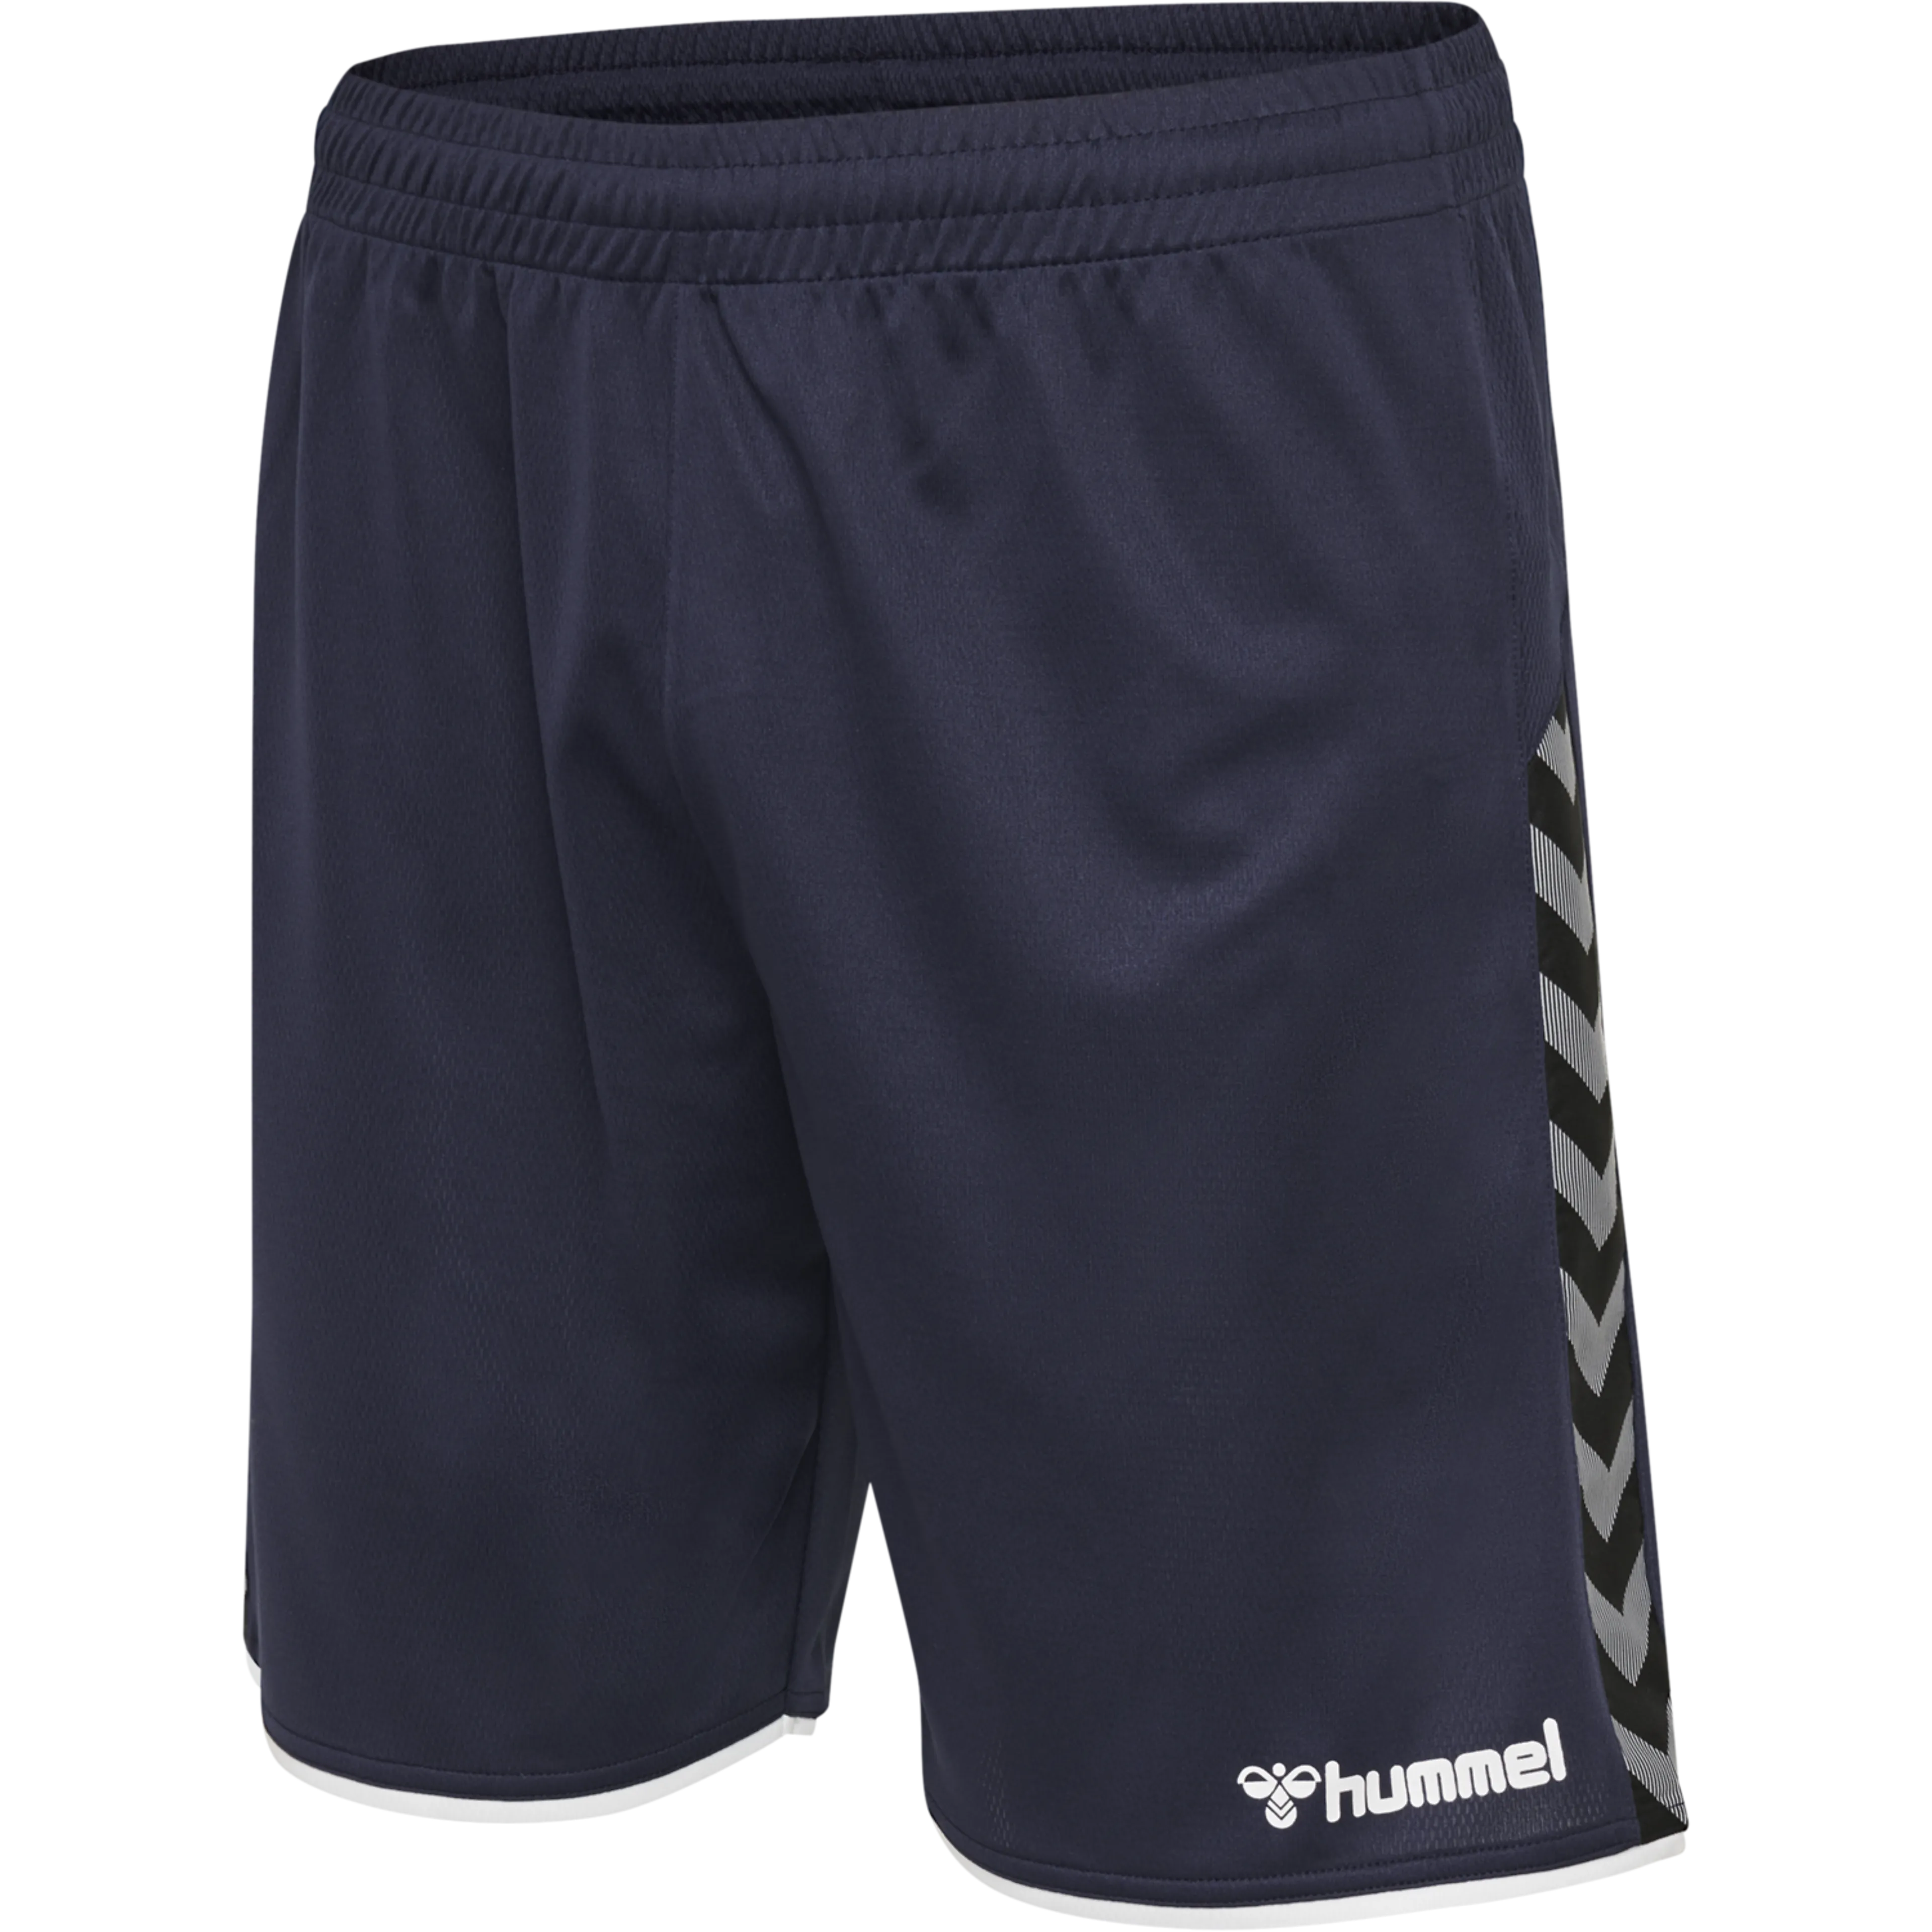 AUTHENTIC KIDS POLY SHORTS